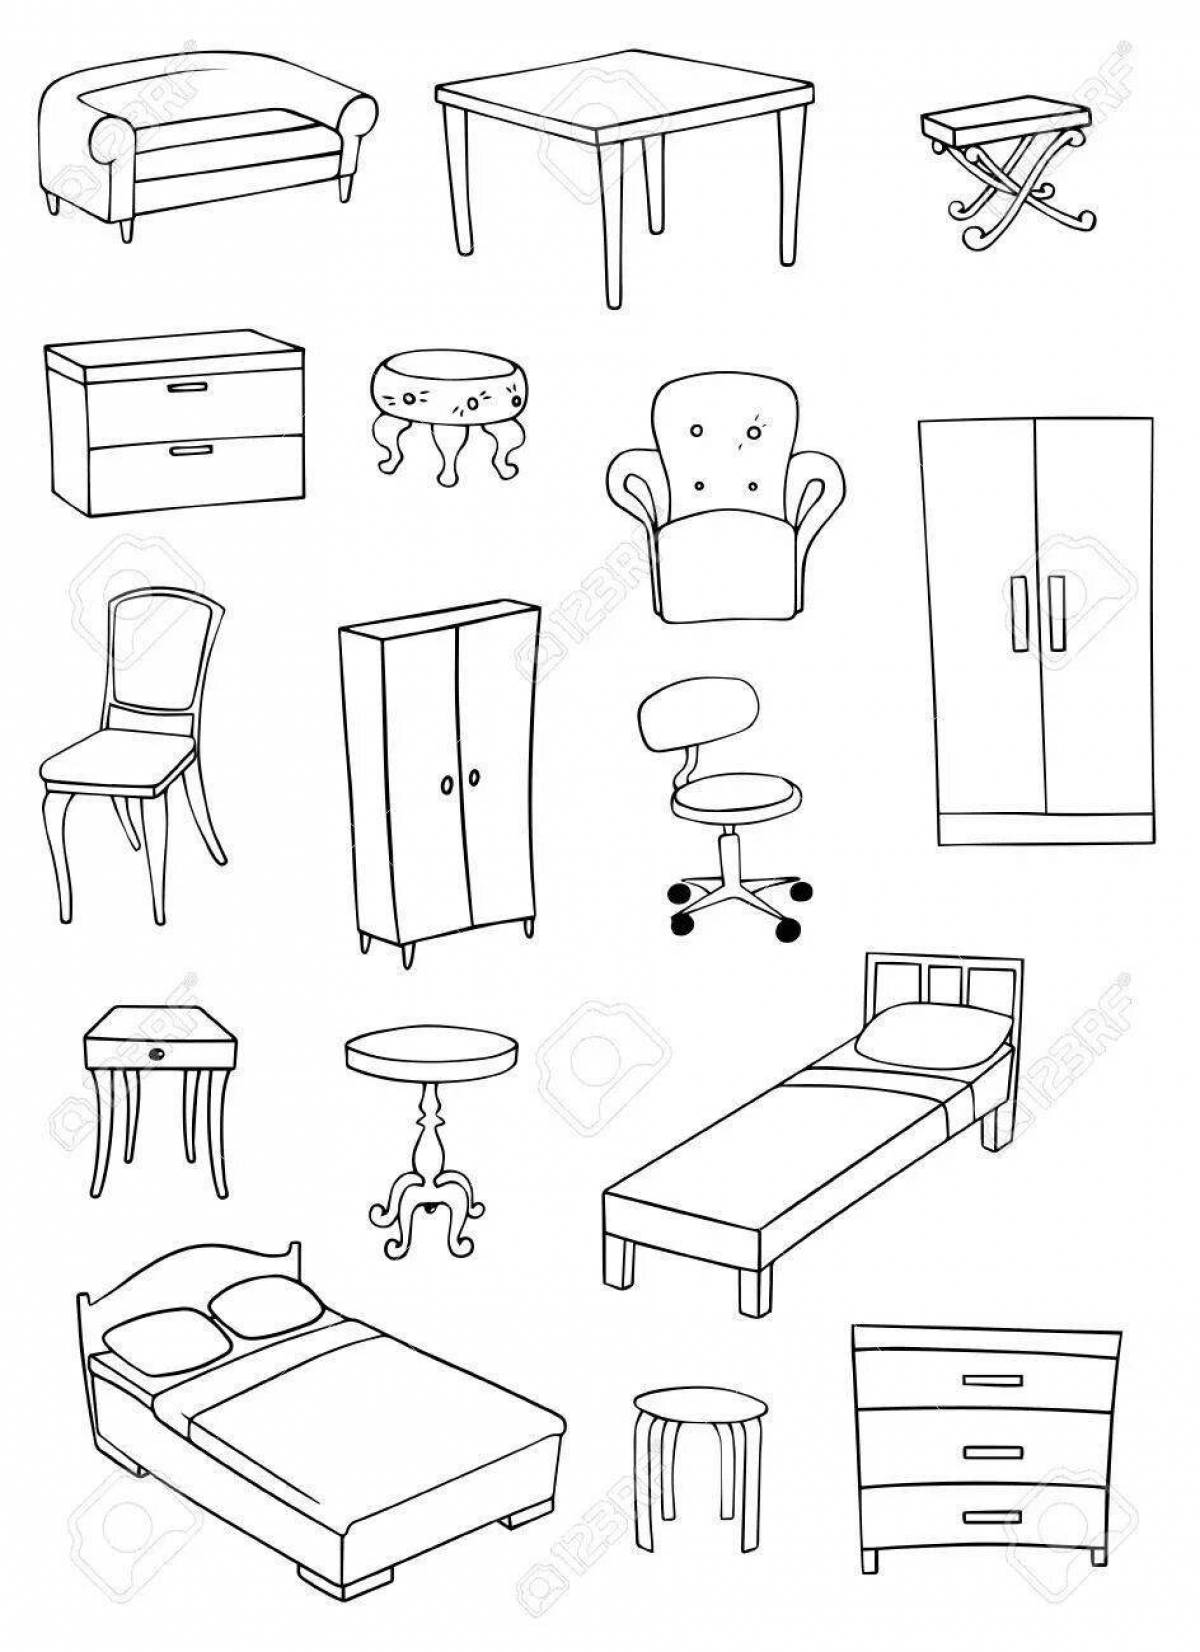 Attractive furniture coloring for the elderly